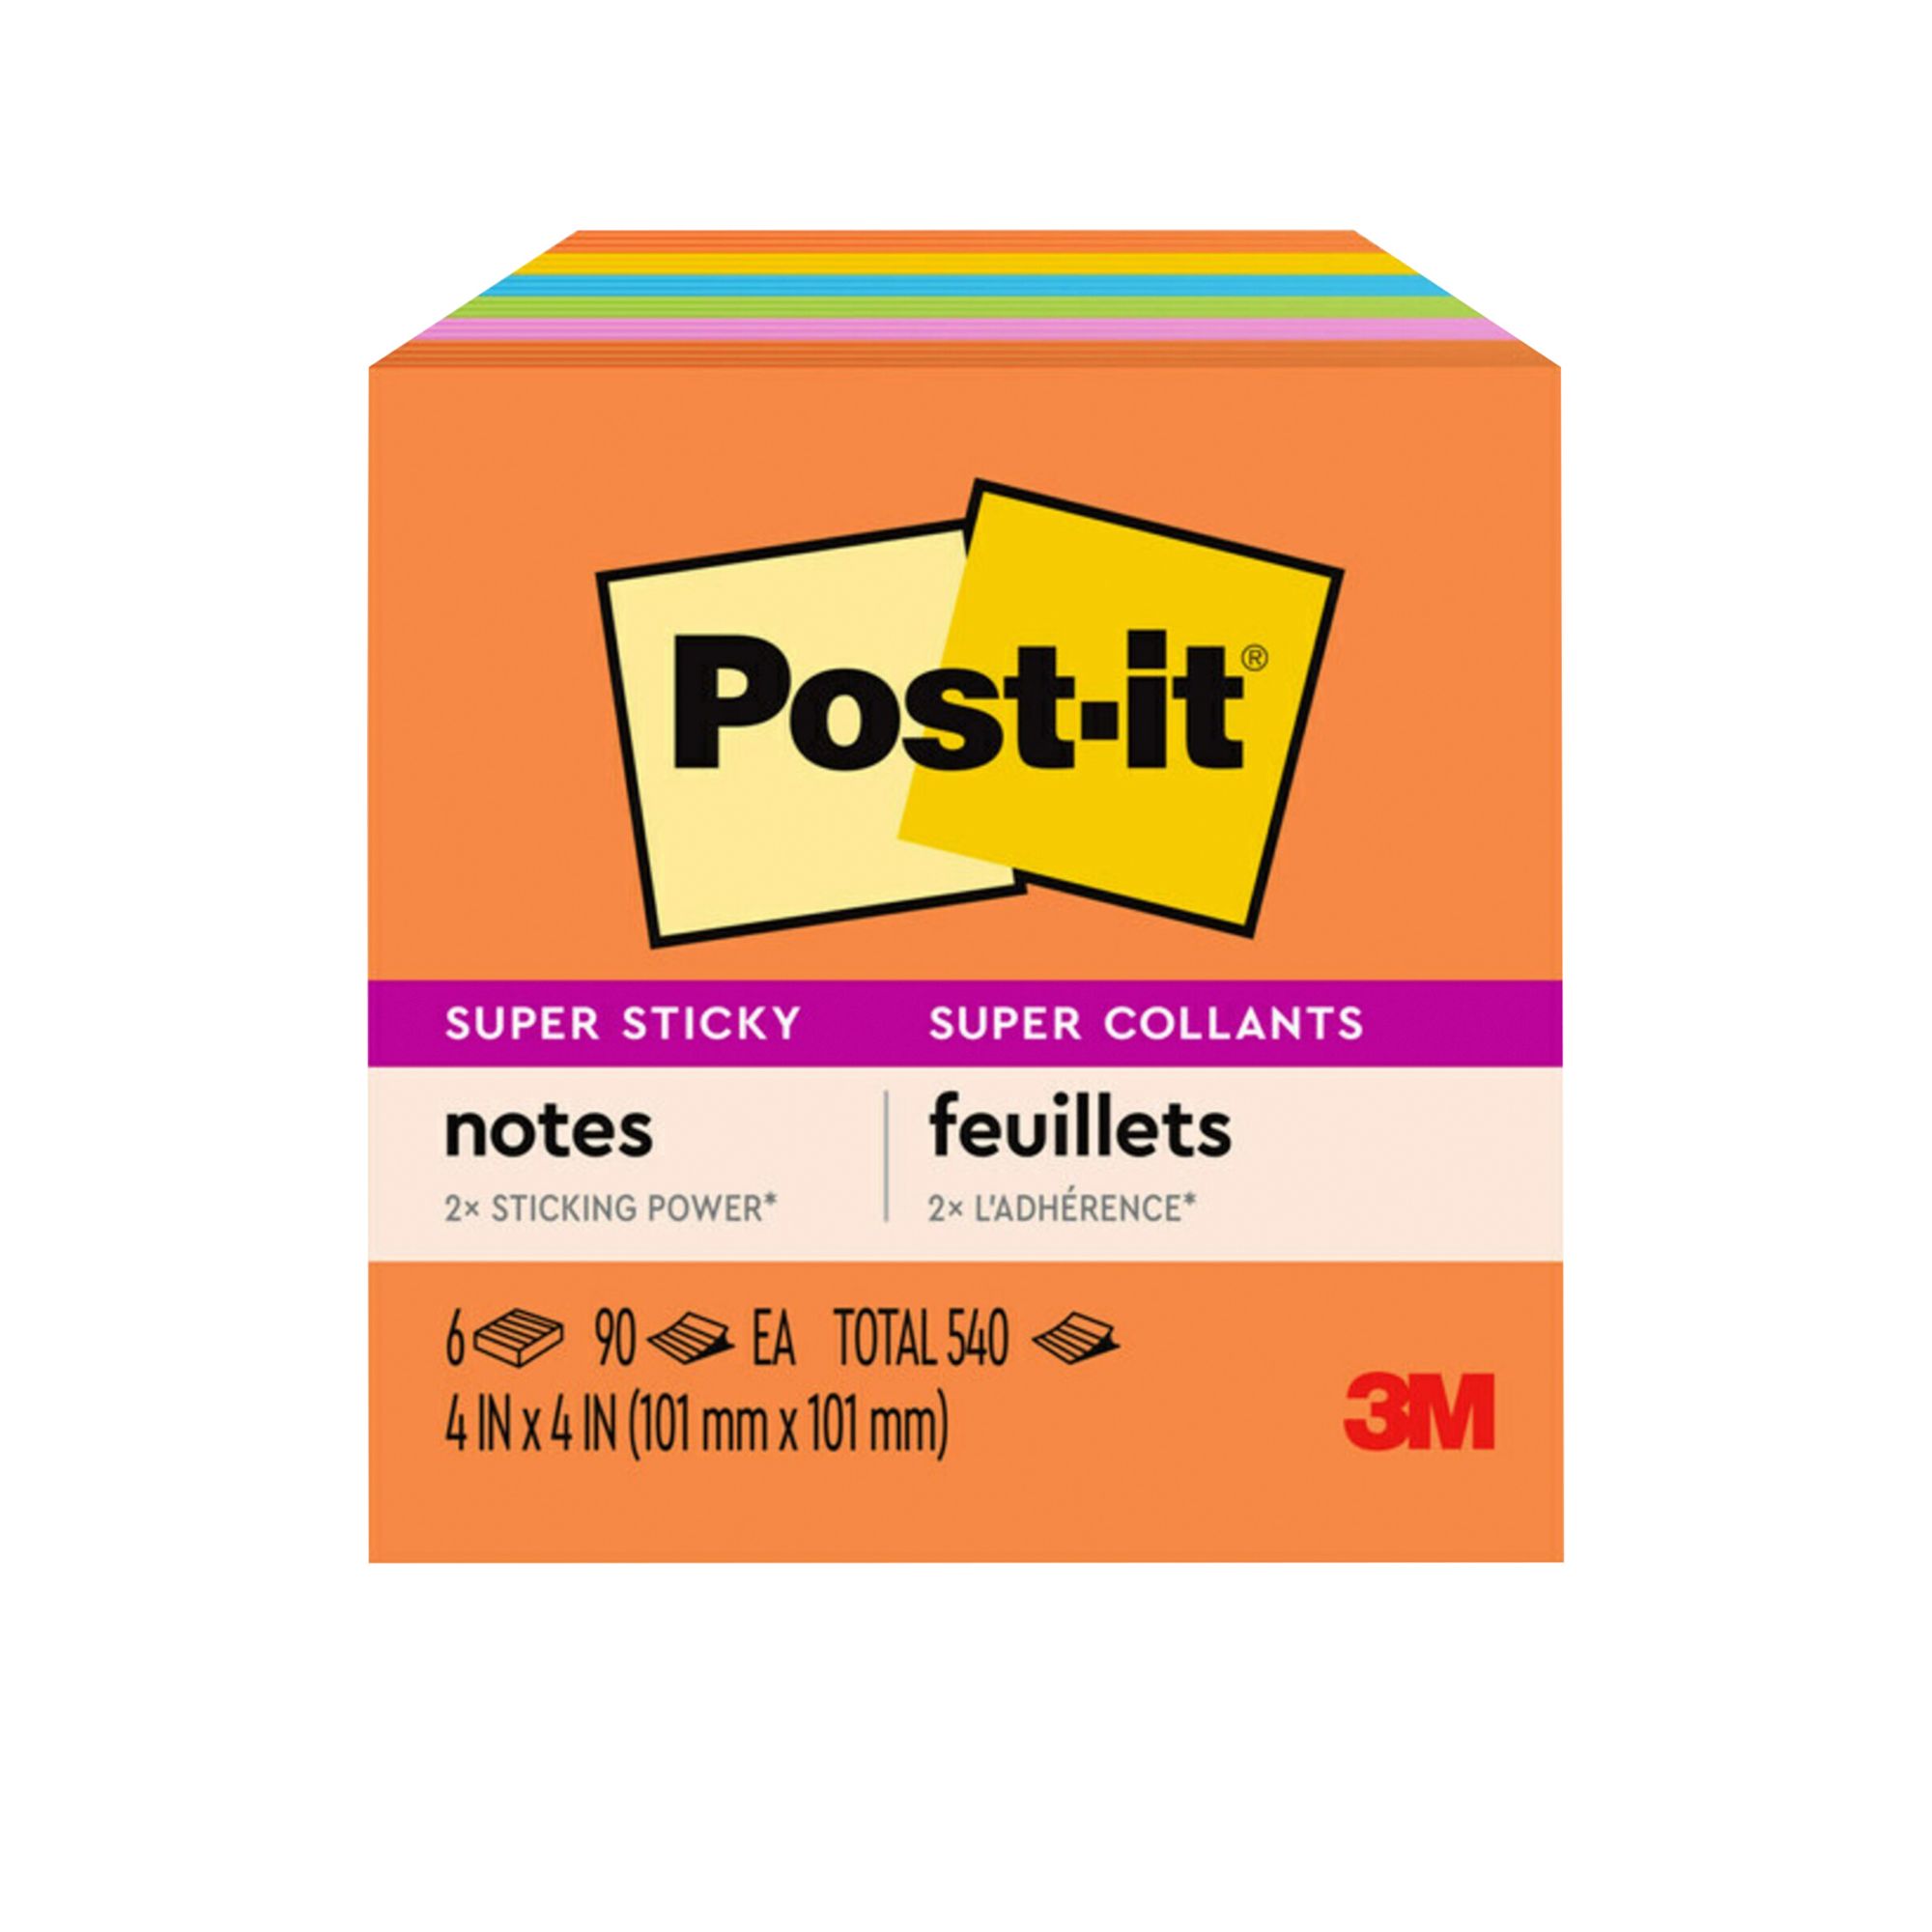 Post-it Super Sticky Notes Pack of 3 3 Inch Assorted